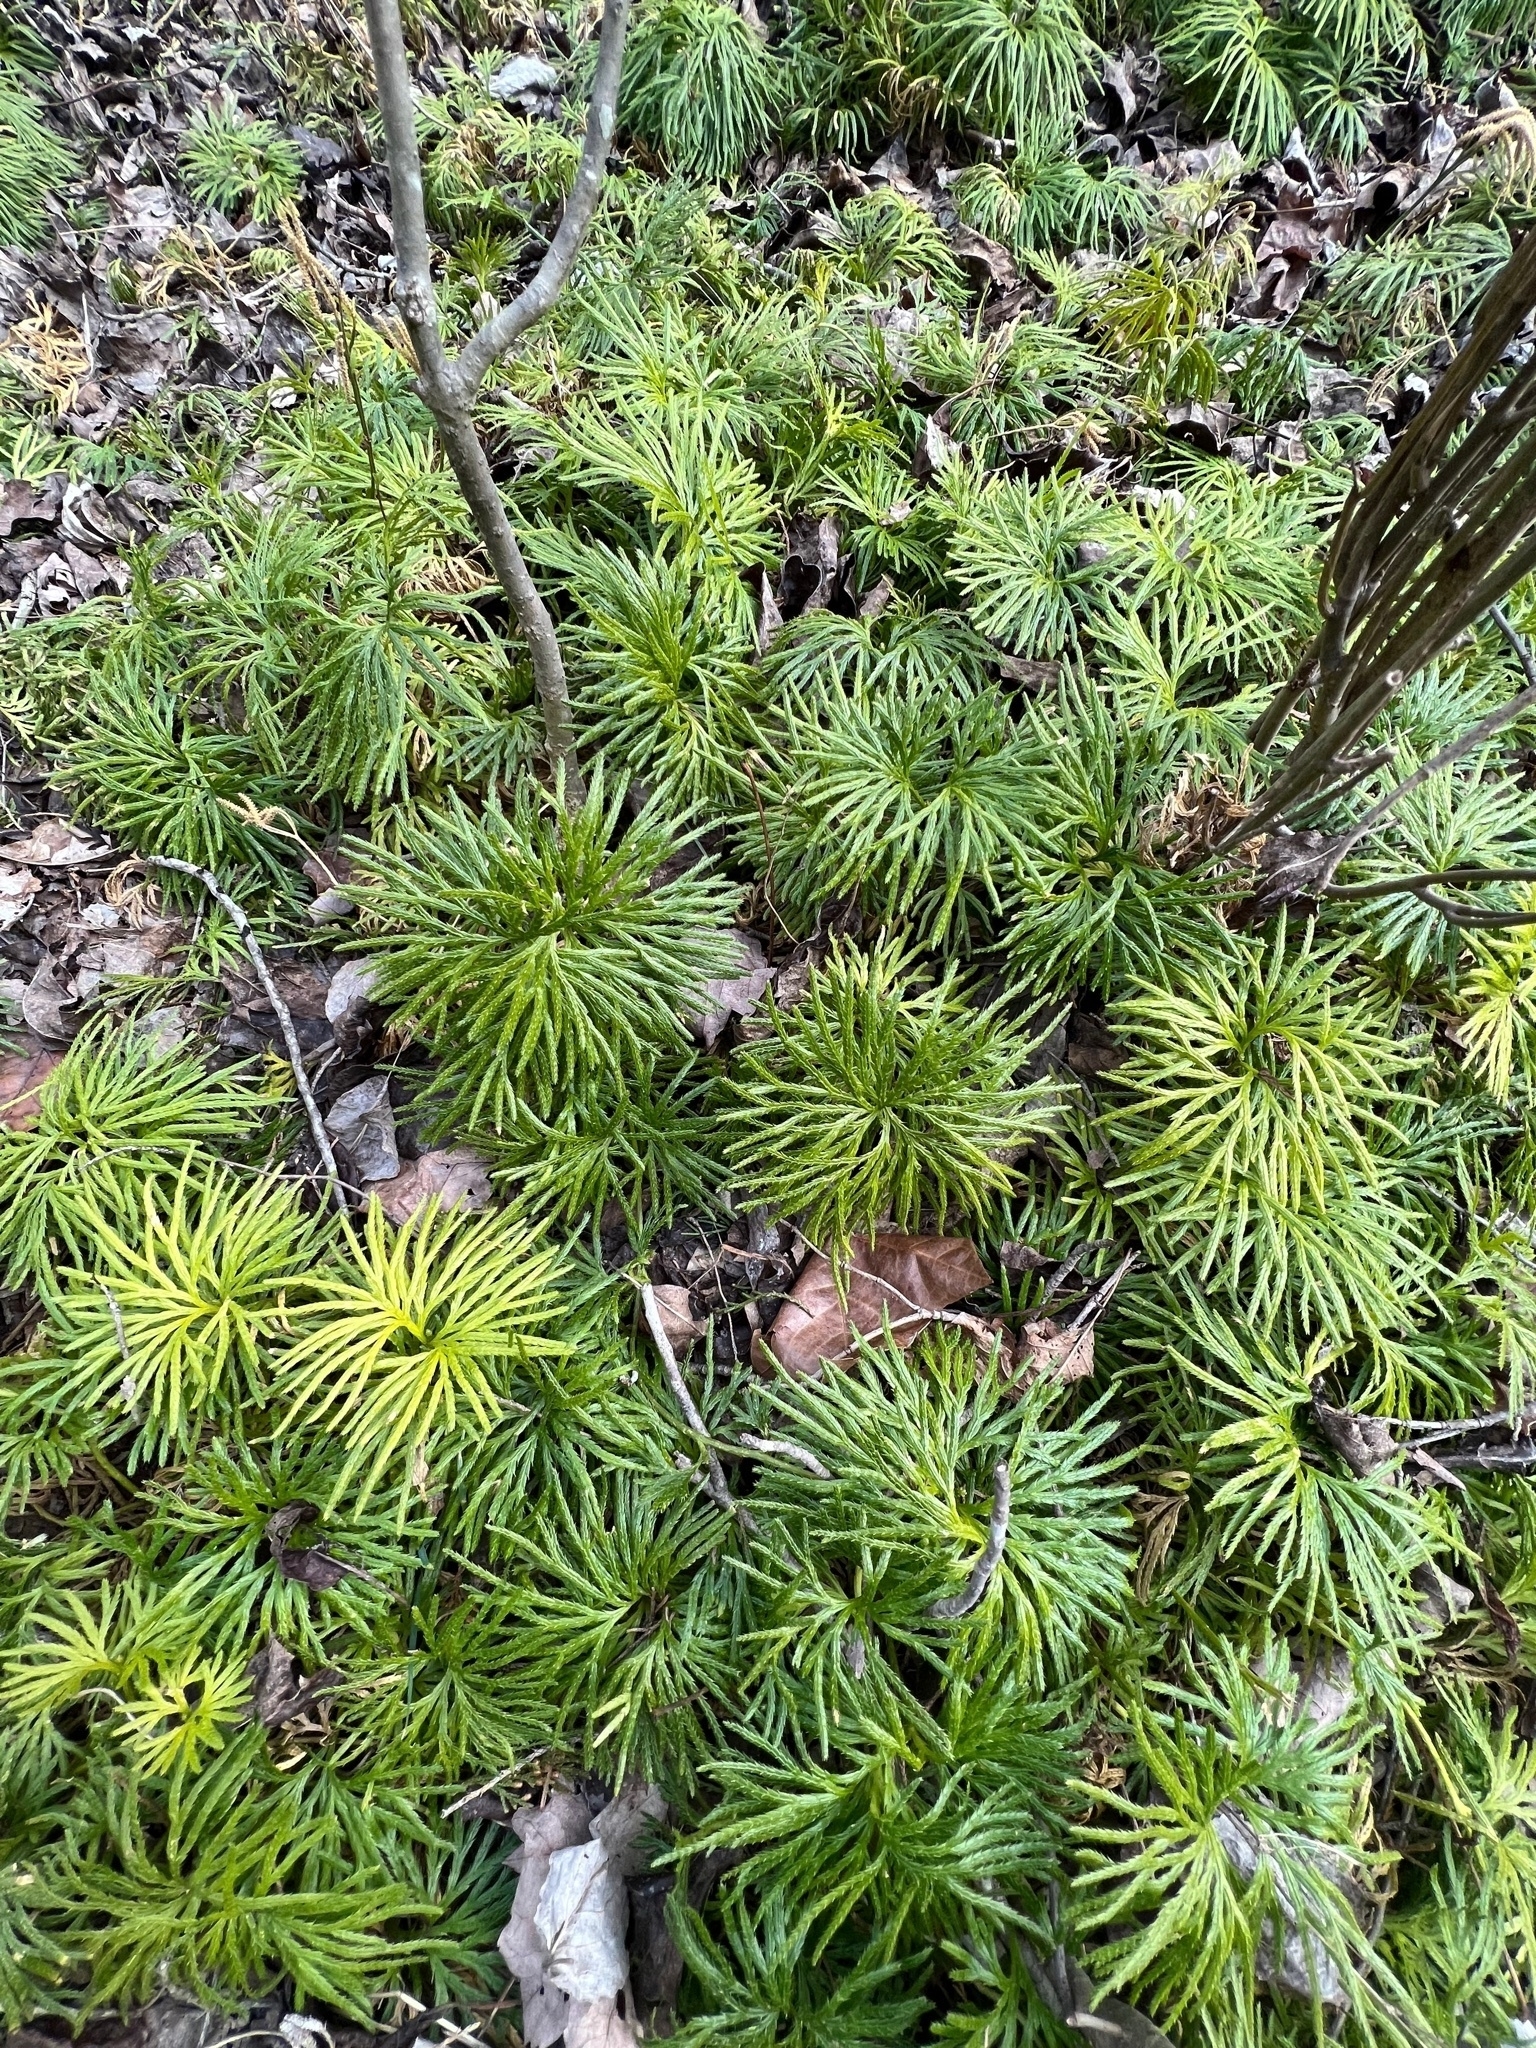 An evergreen, ground cover resembling cedar branches covers the winter forest floor.